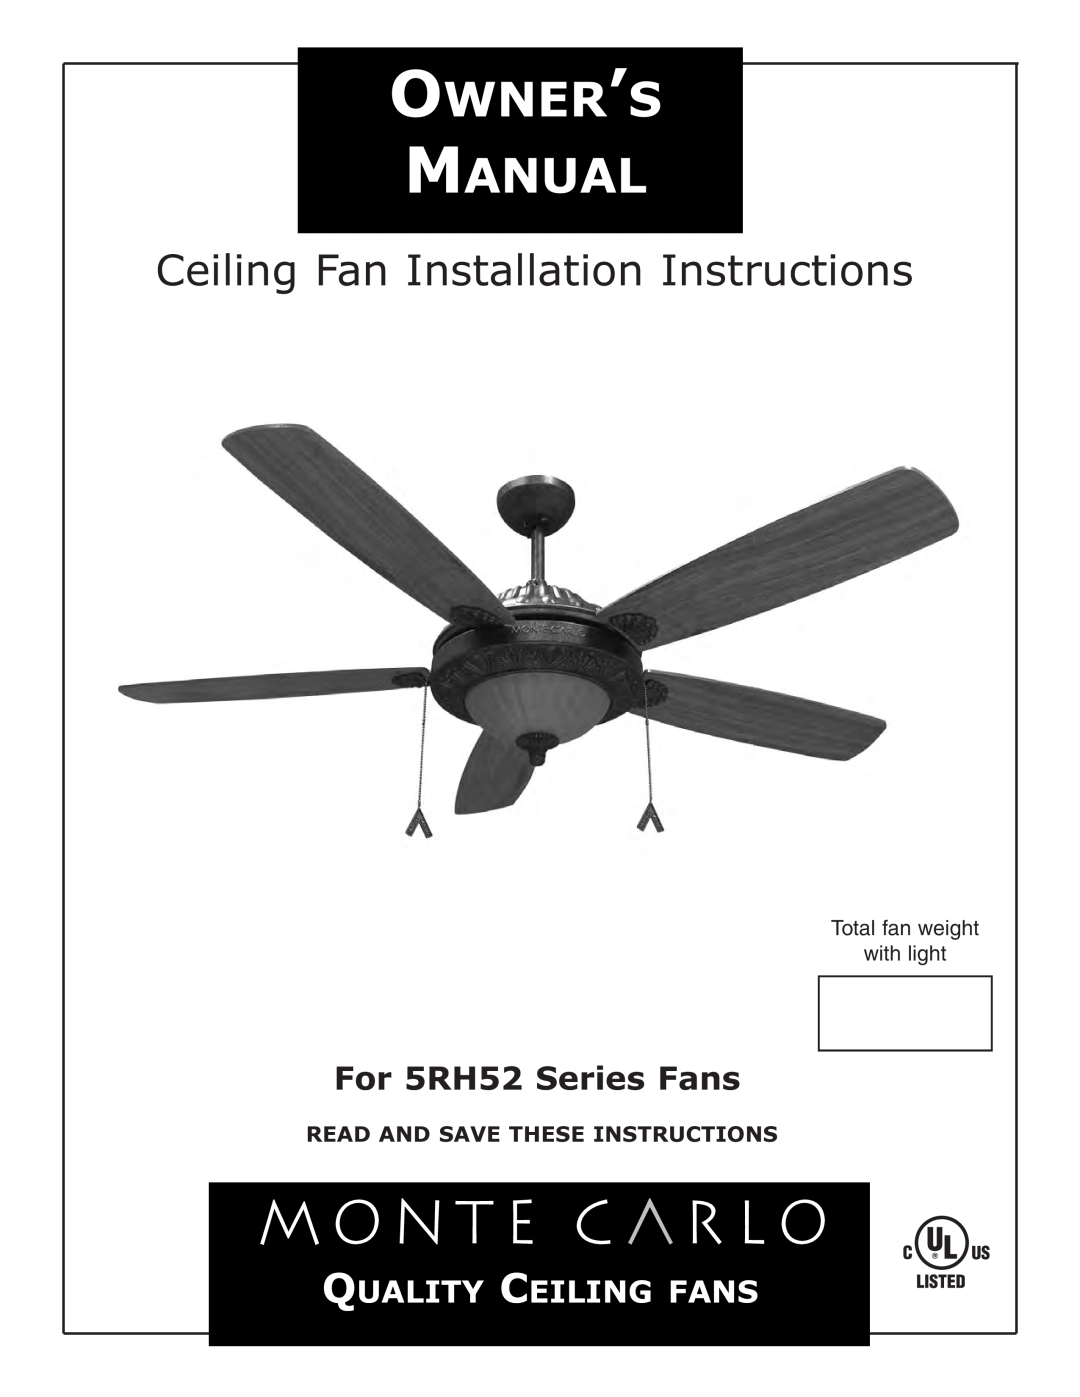 Monte Carlo Fan Company installation instructions Read And Save These Instructions, For 5RH52 Series Fans 